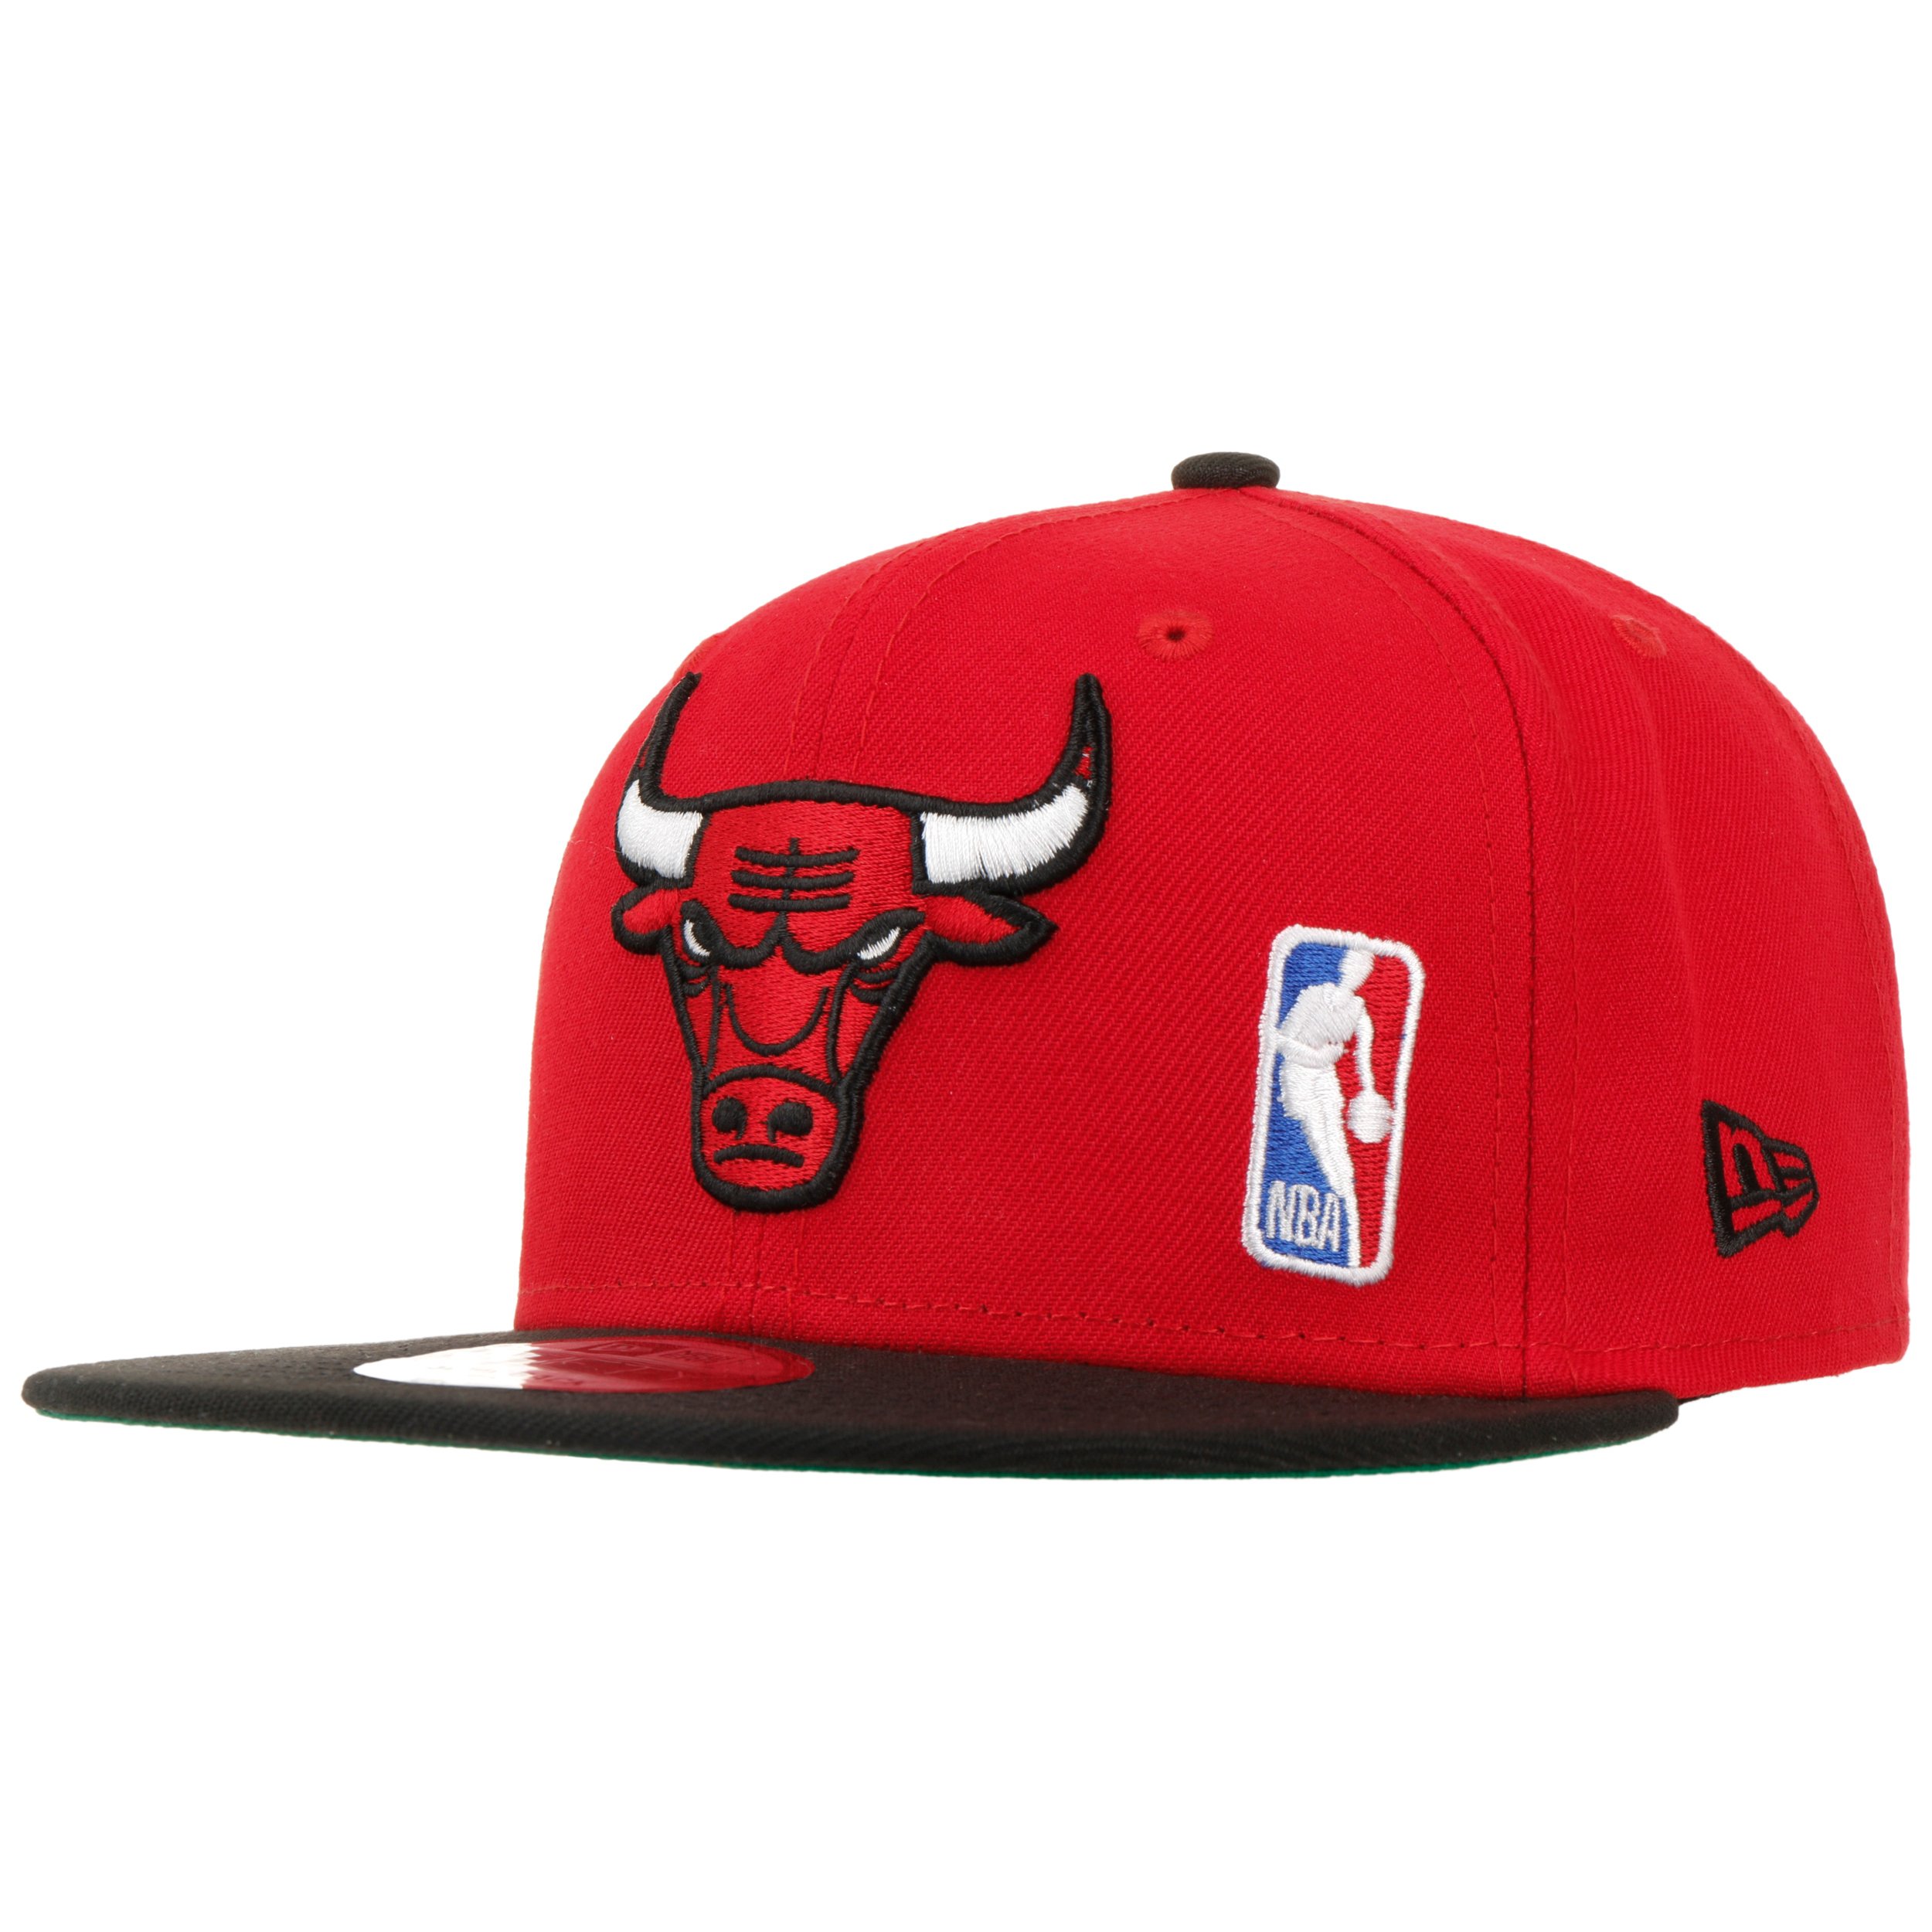 hypothese Donder geroosterd brood 9Fifty NBA Team Arch Bulls Cap by New Era - 46,95 €